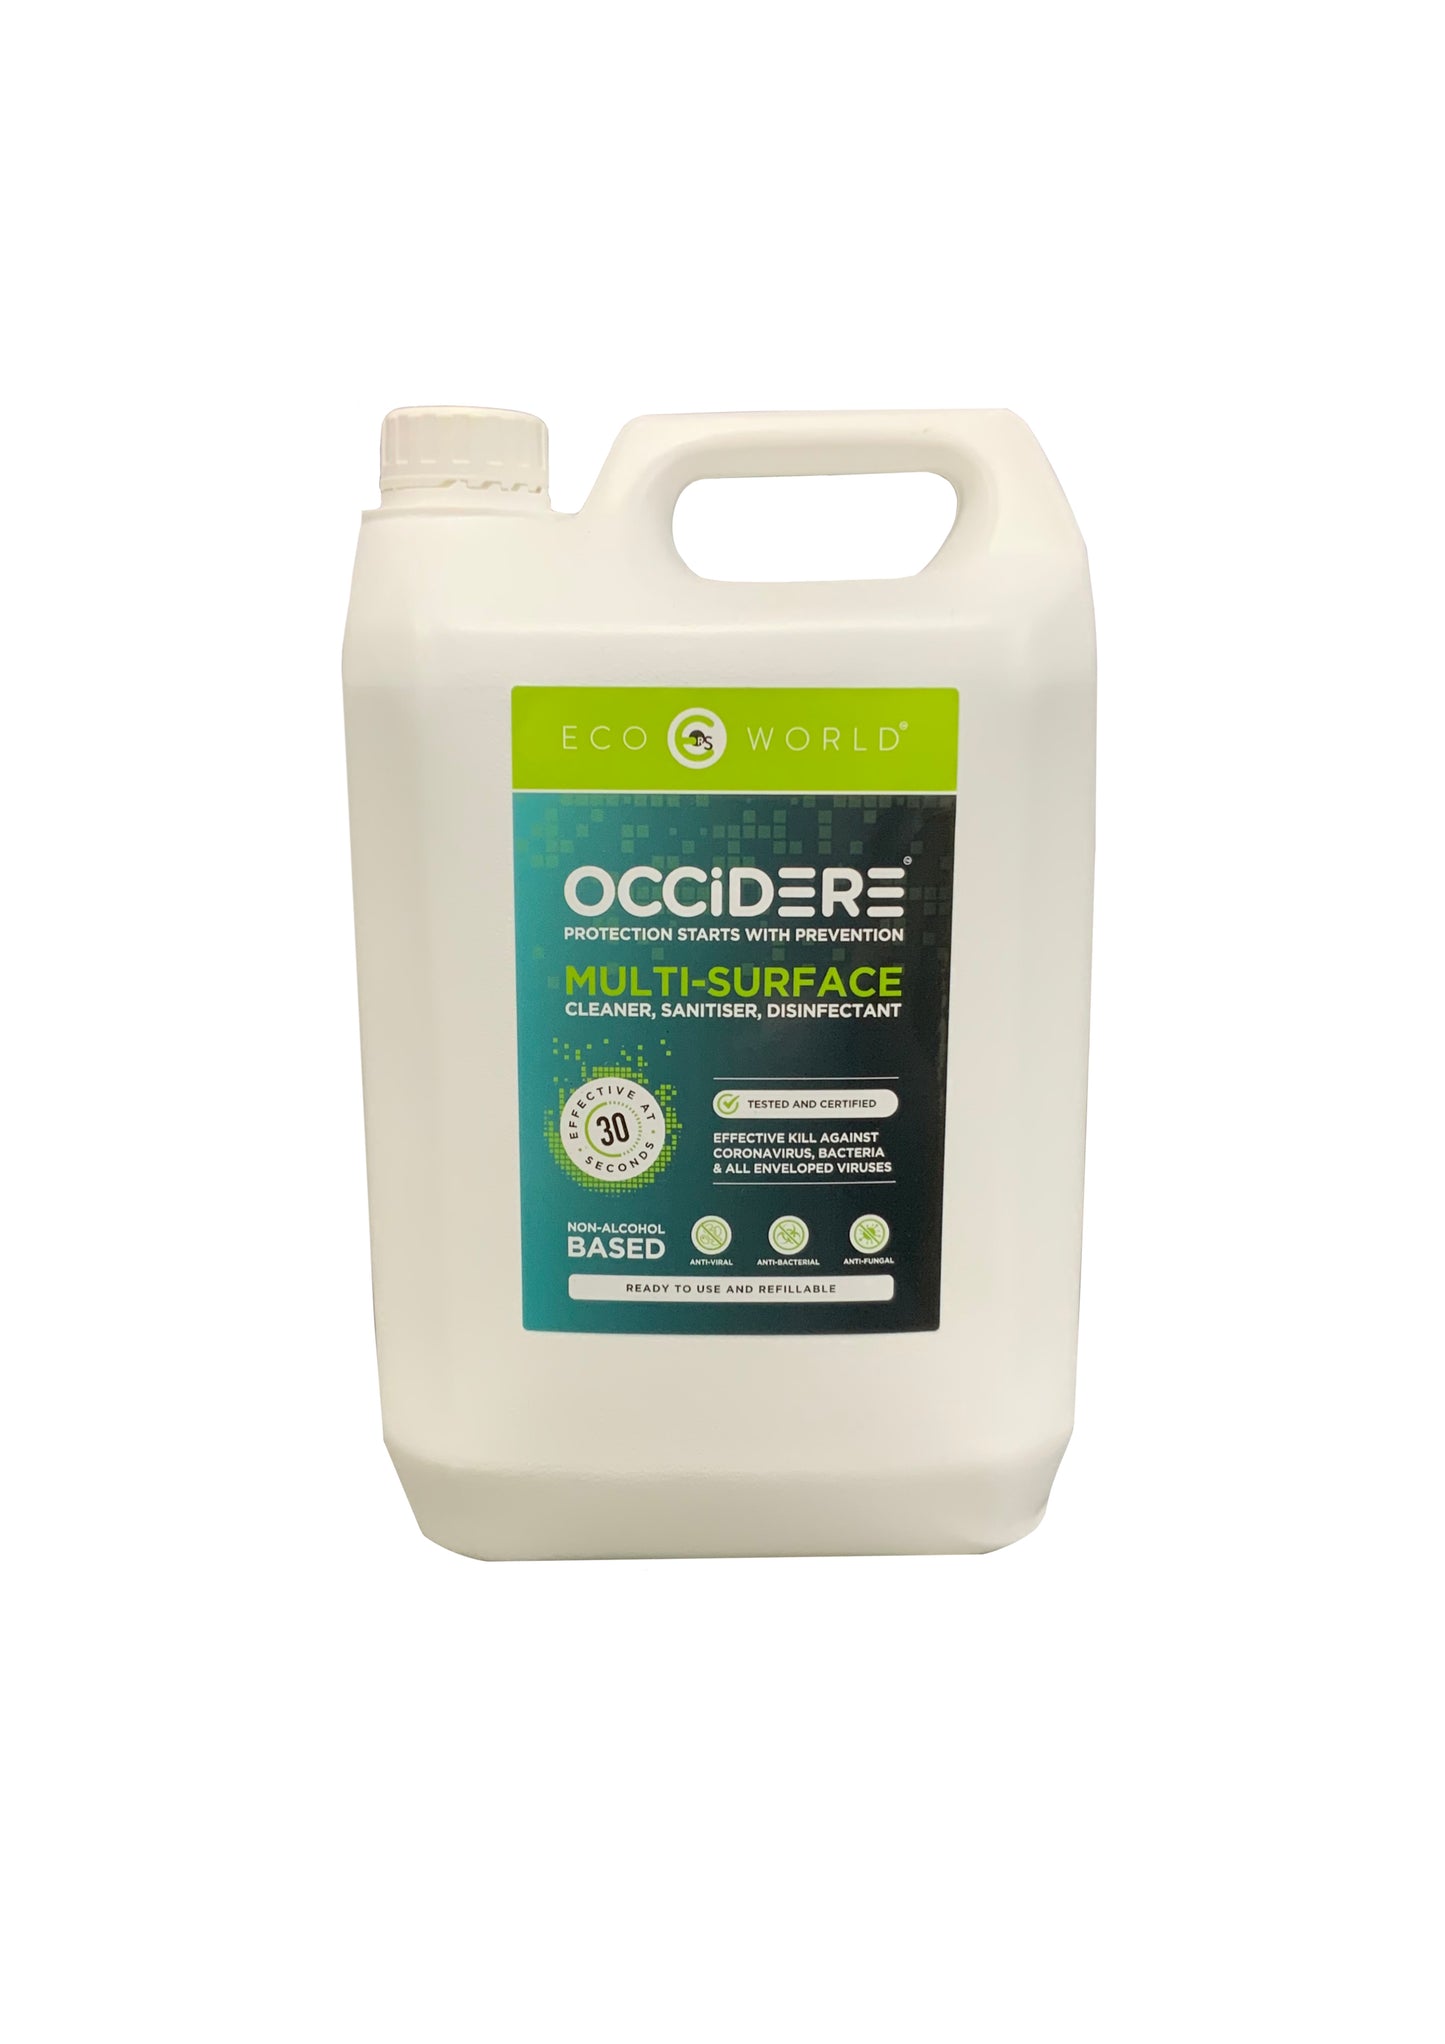 OCCIDERE®  MULTI SURFACE CLEANER - 3 in 1, Sanitiser, Disinfectant, Cleaner (5 LITRE), Non Alcohol based.